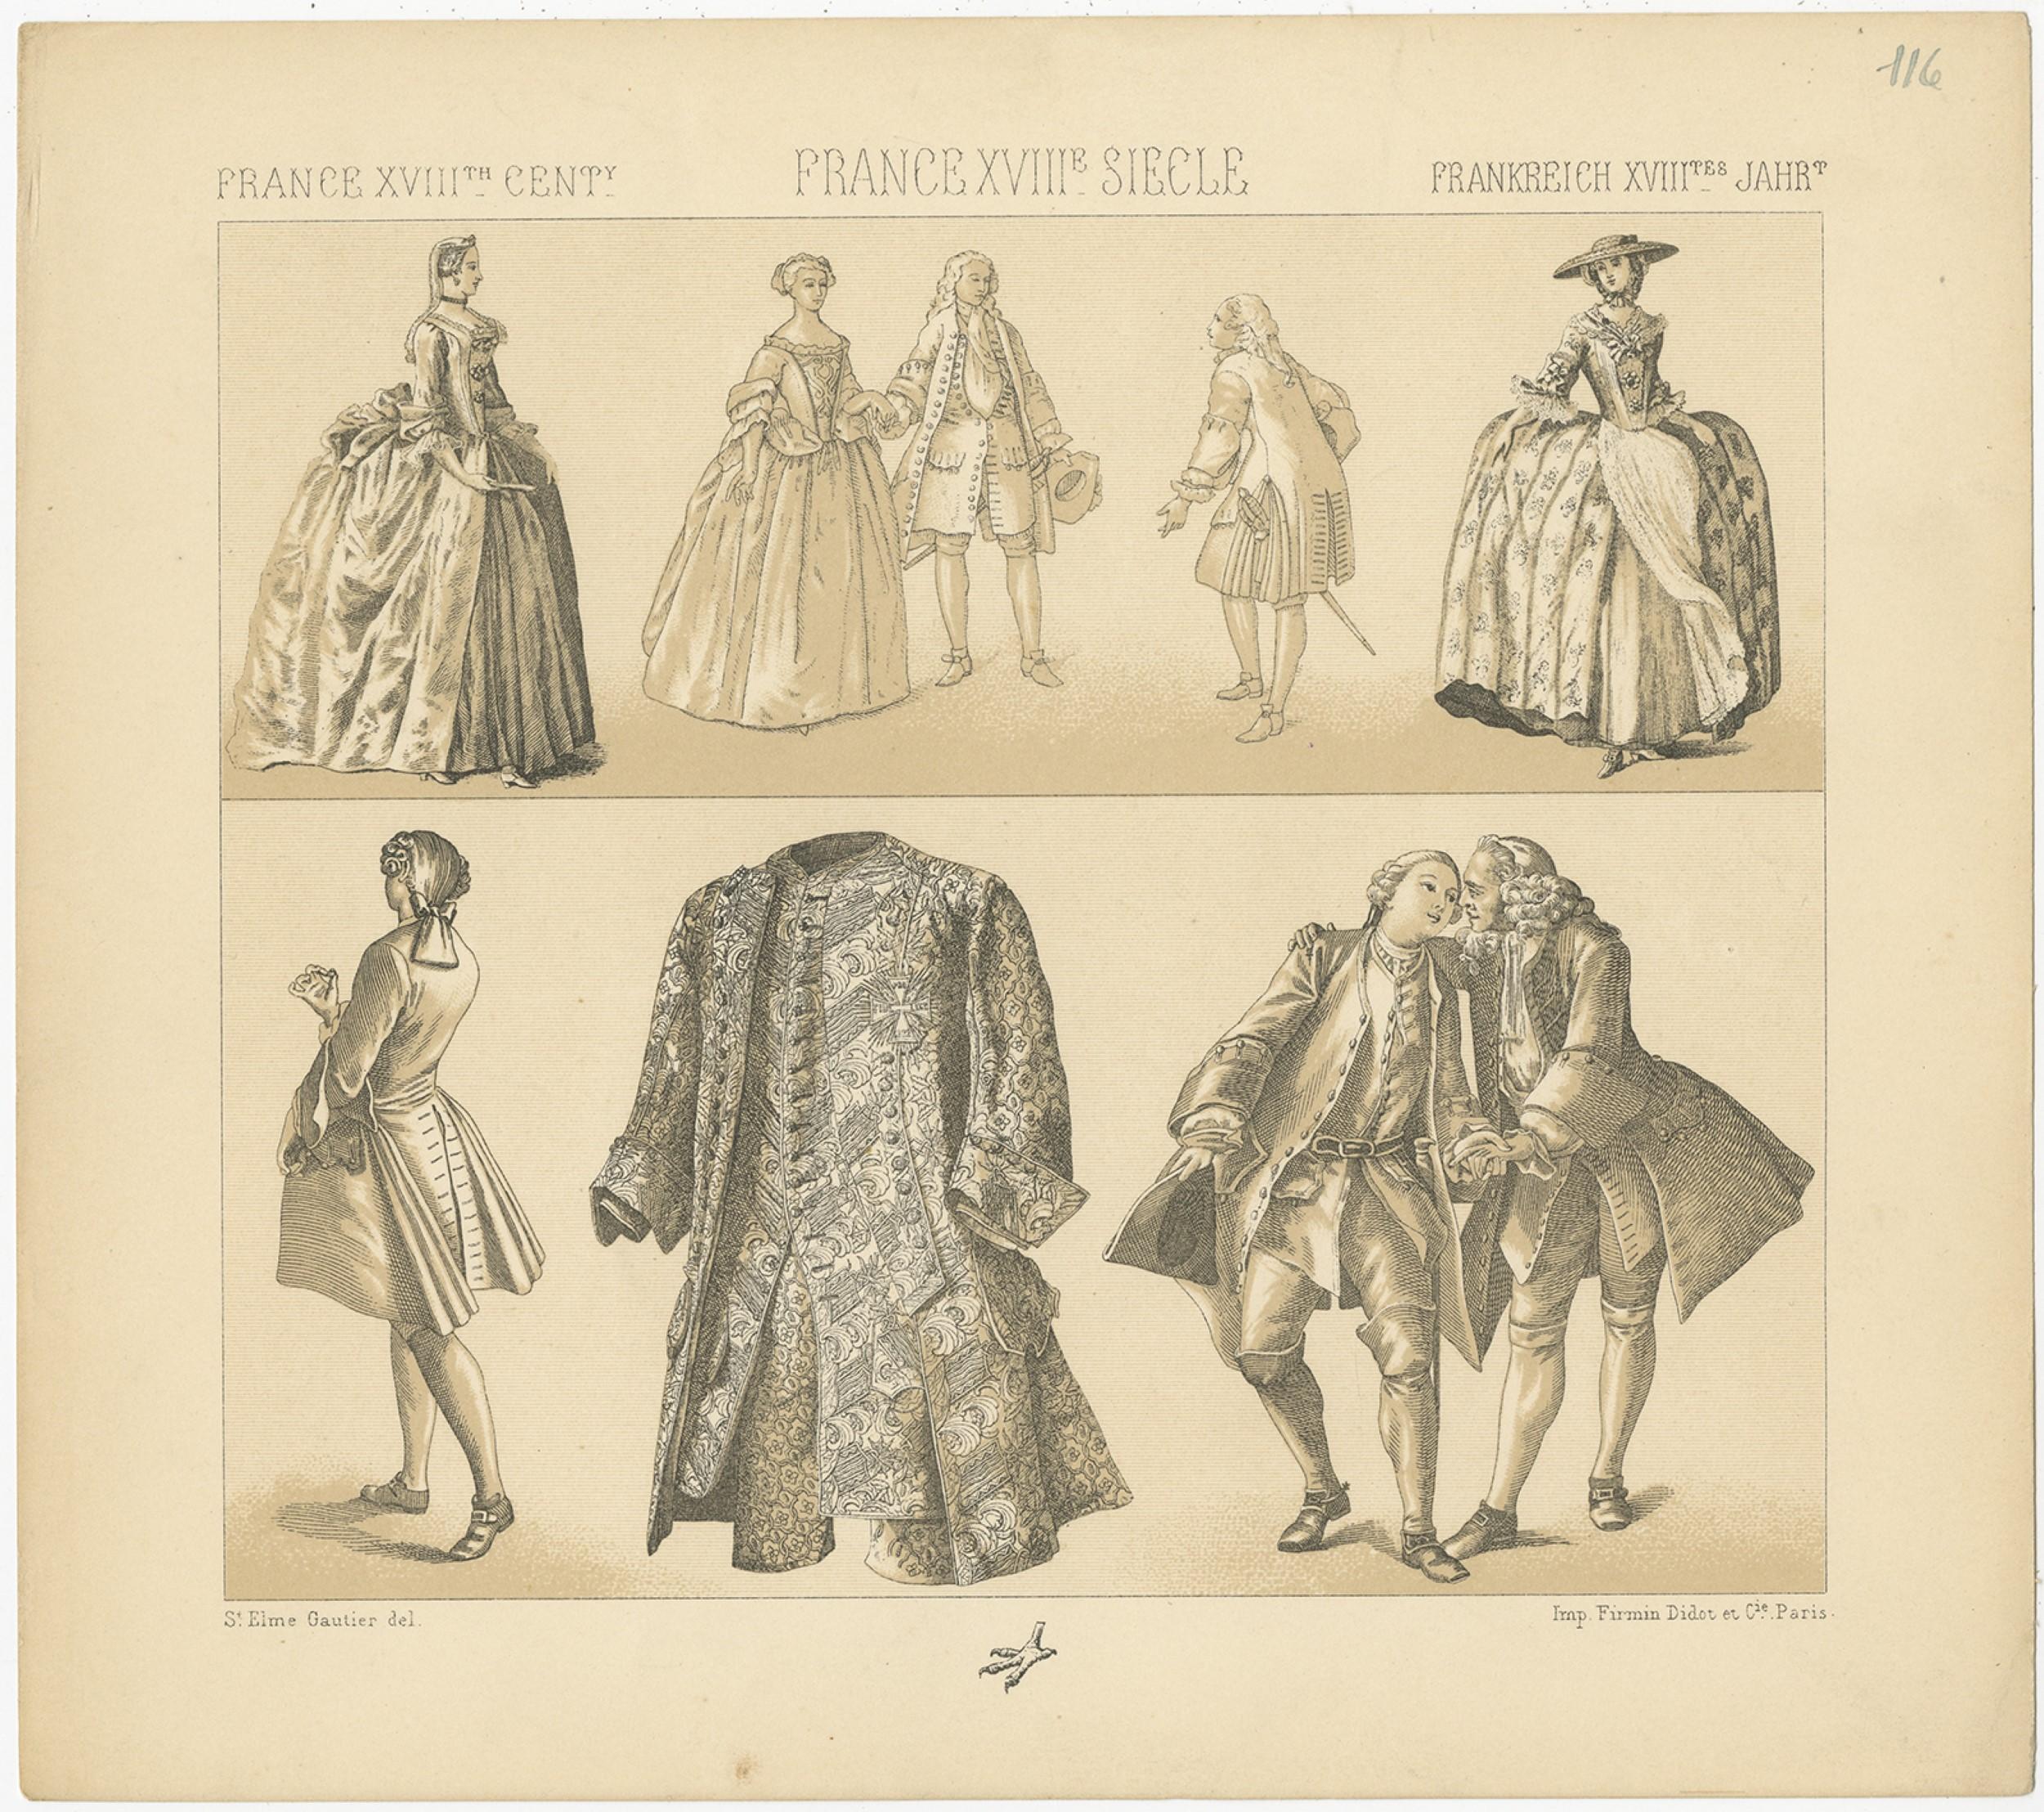 Antique print titled 'France XVIIIth Cent - France XVIIIe, Siecle - Frankreich XVIIItes Jahr'. Chromolithograph of French 18th century costumes. This print originates from 'Le Costume Historique' by M.A. Racinet. Published, circa 1880.
 
    